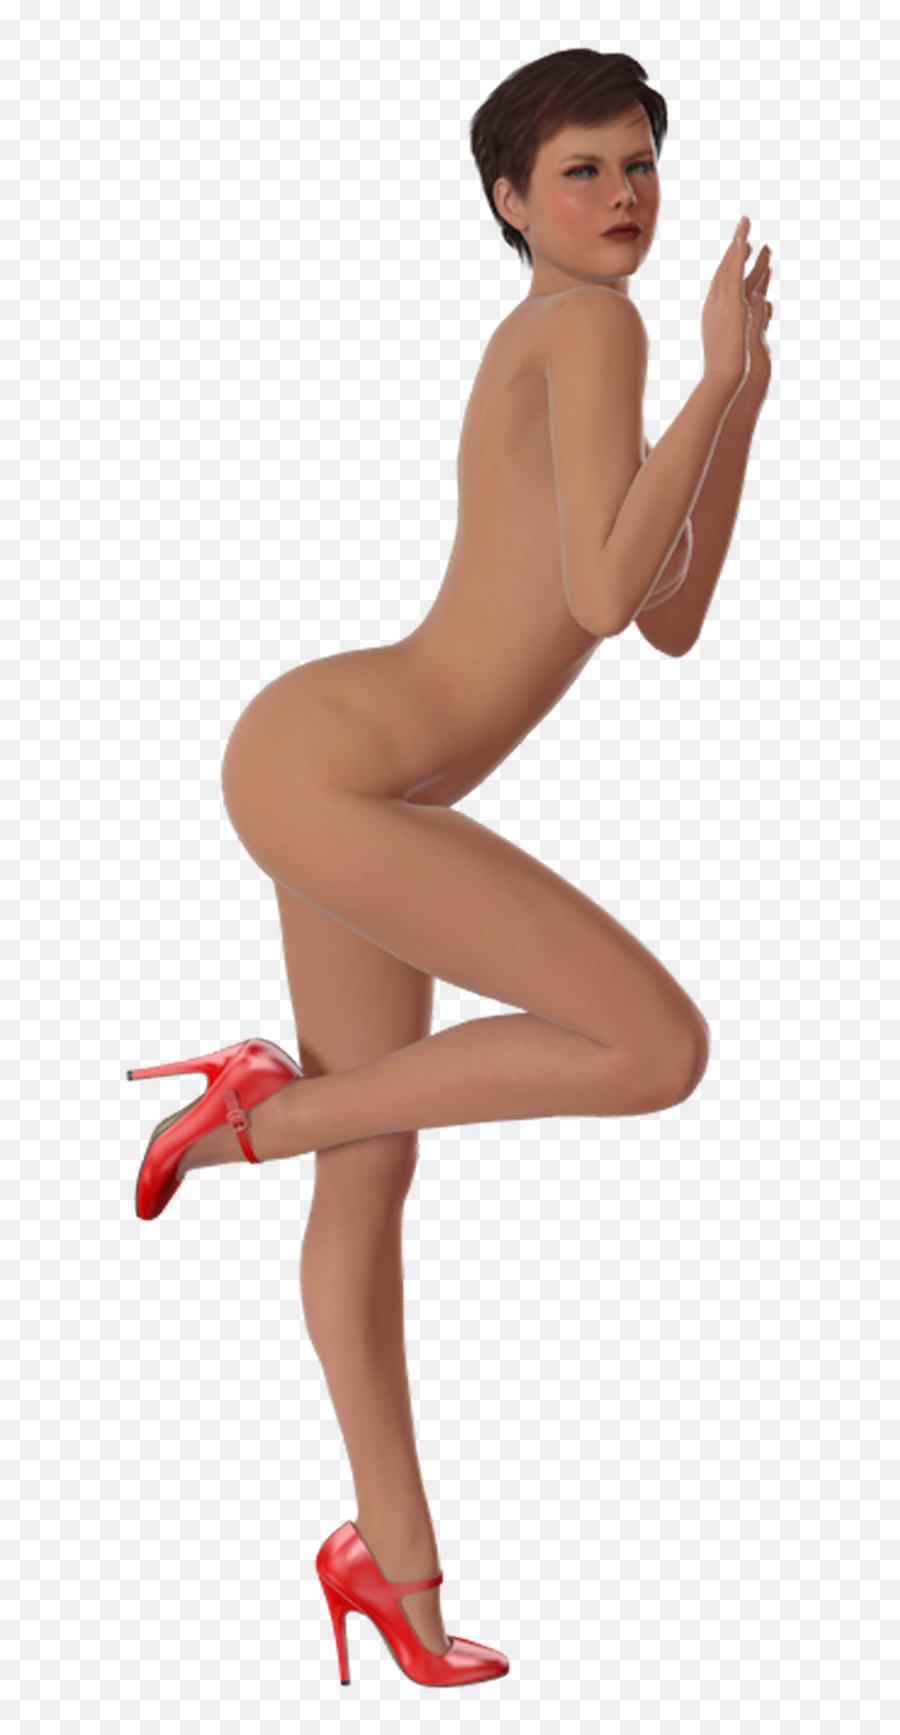 Snappygoatcom - Free Public Domain Images Snappygoatcom Girl Png,Sexy Woman Png